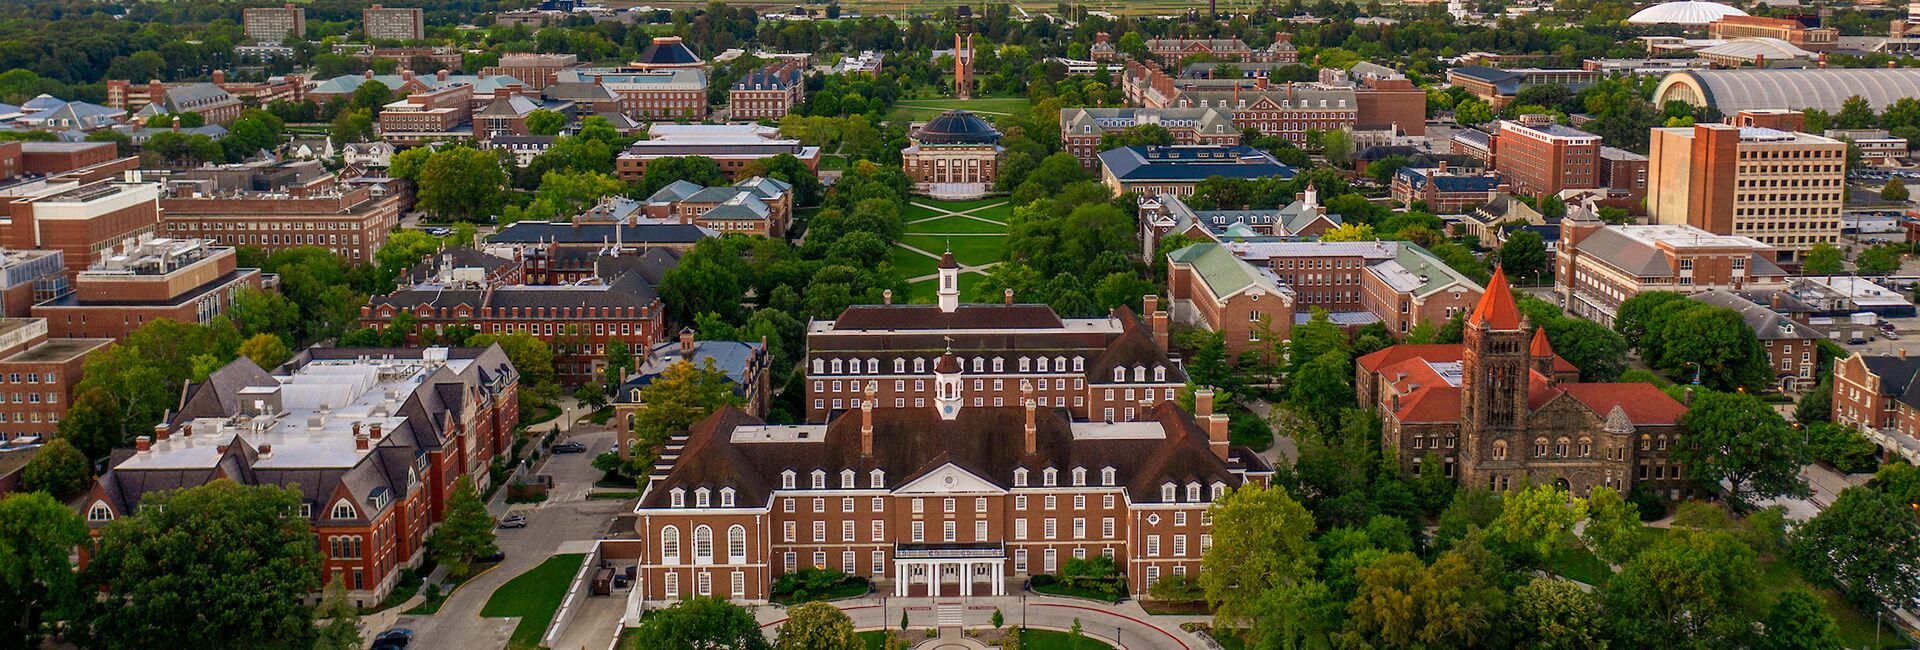 An aerial view of campus. The Quad is the focus, with the Illini Union being prominently displayed.